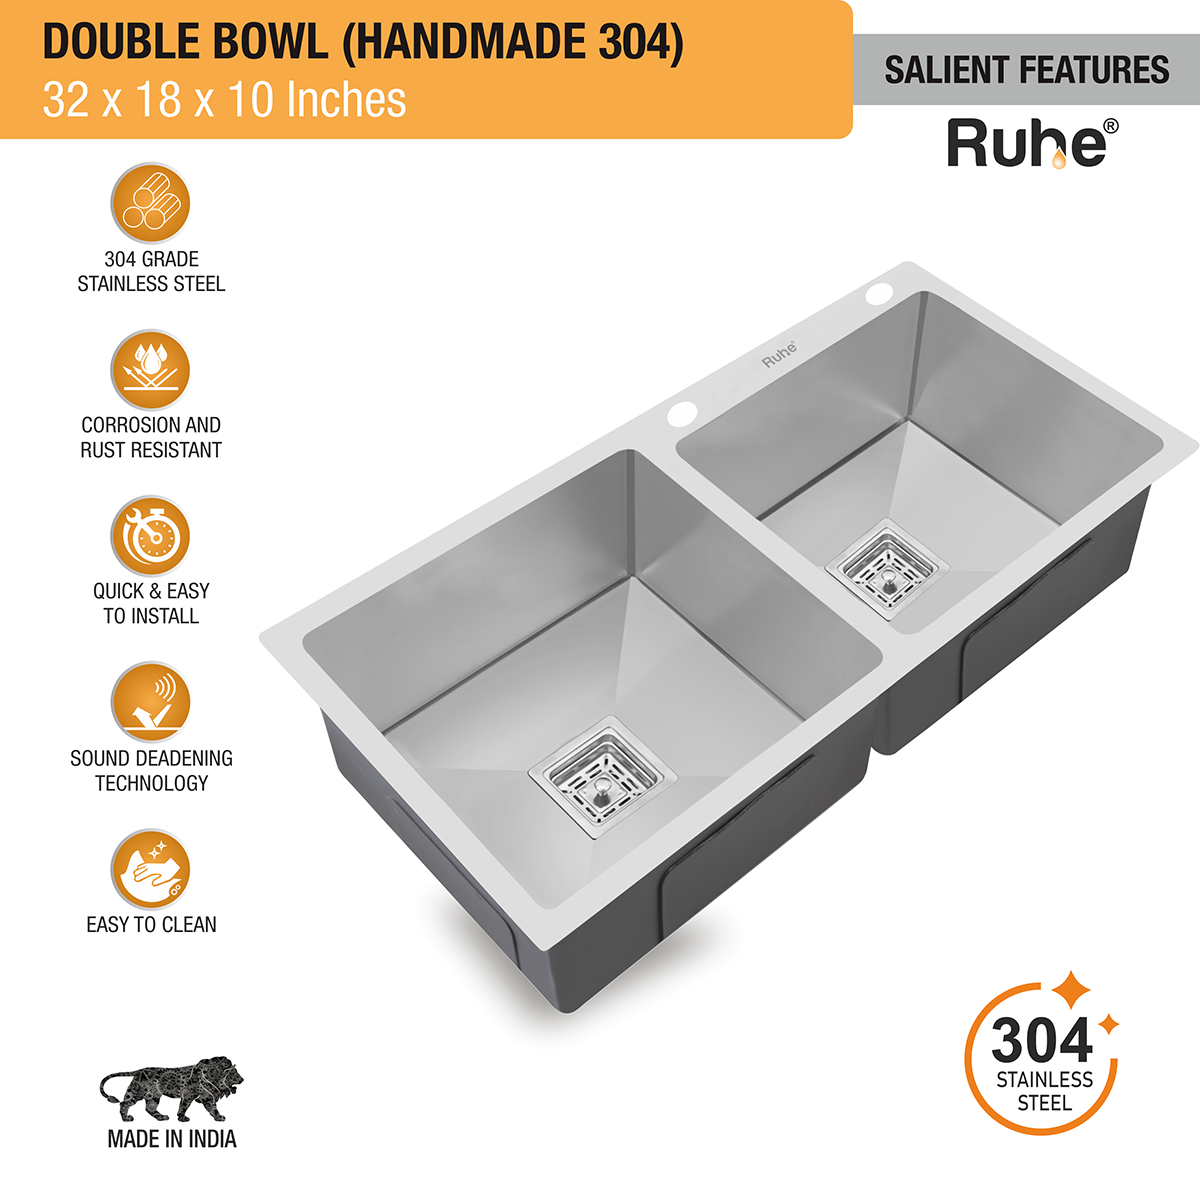 Handmade Double Bowl 304-Grade Kitchen Sink (32 x 18 x 10 Inches) with Tap Hole features and benefits